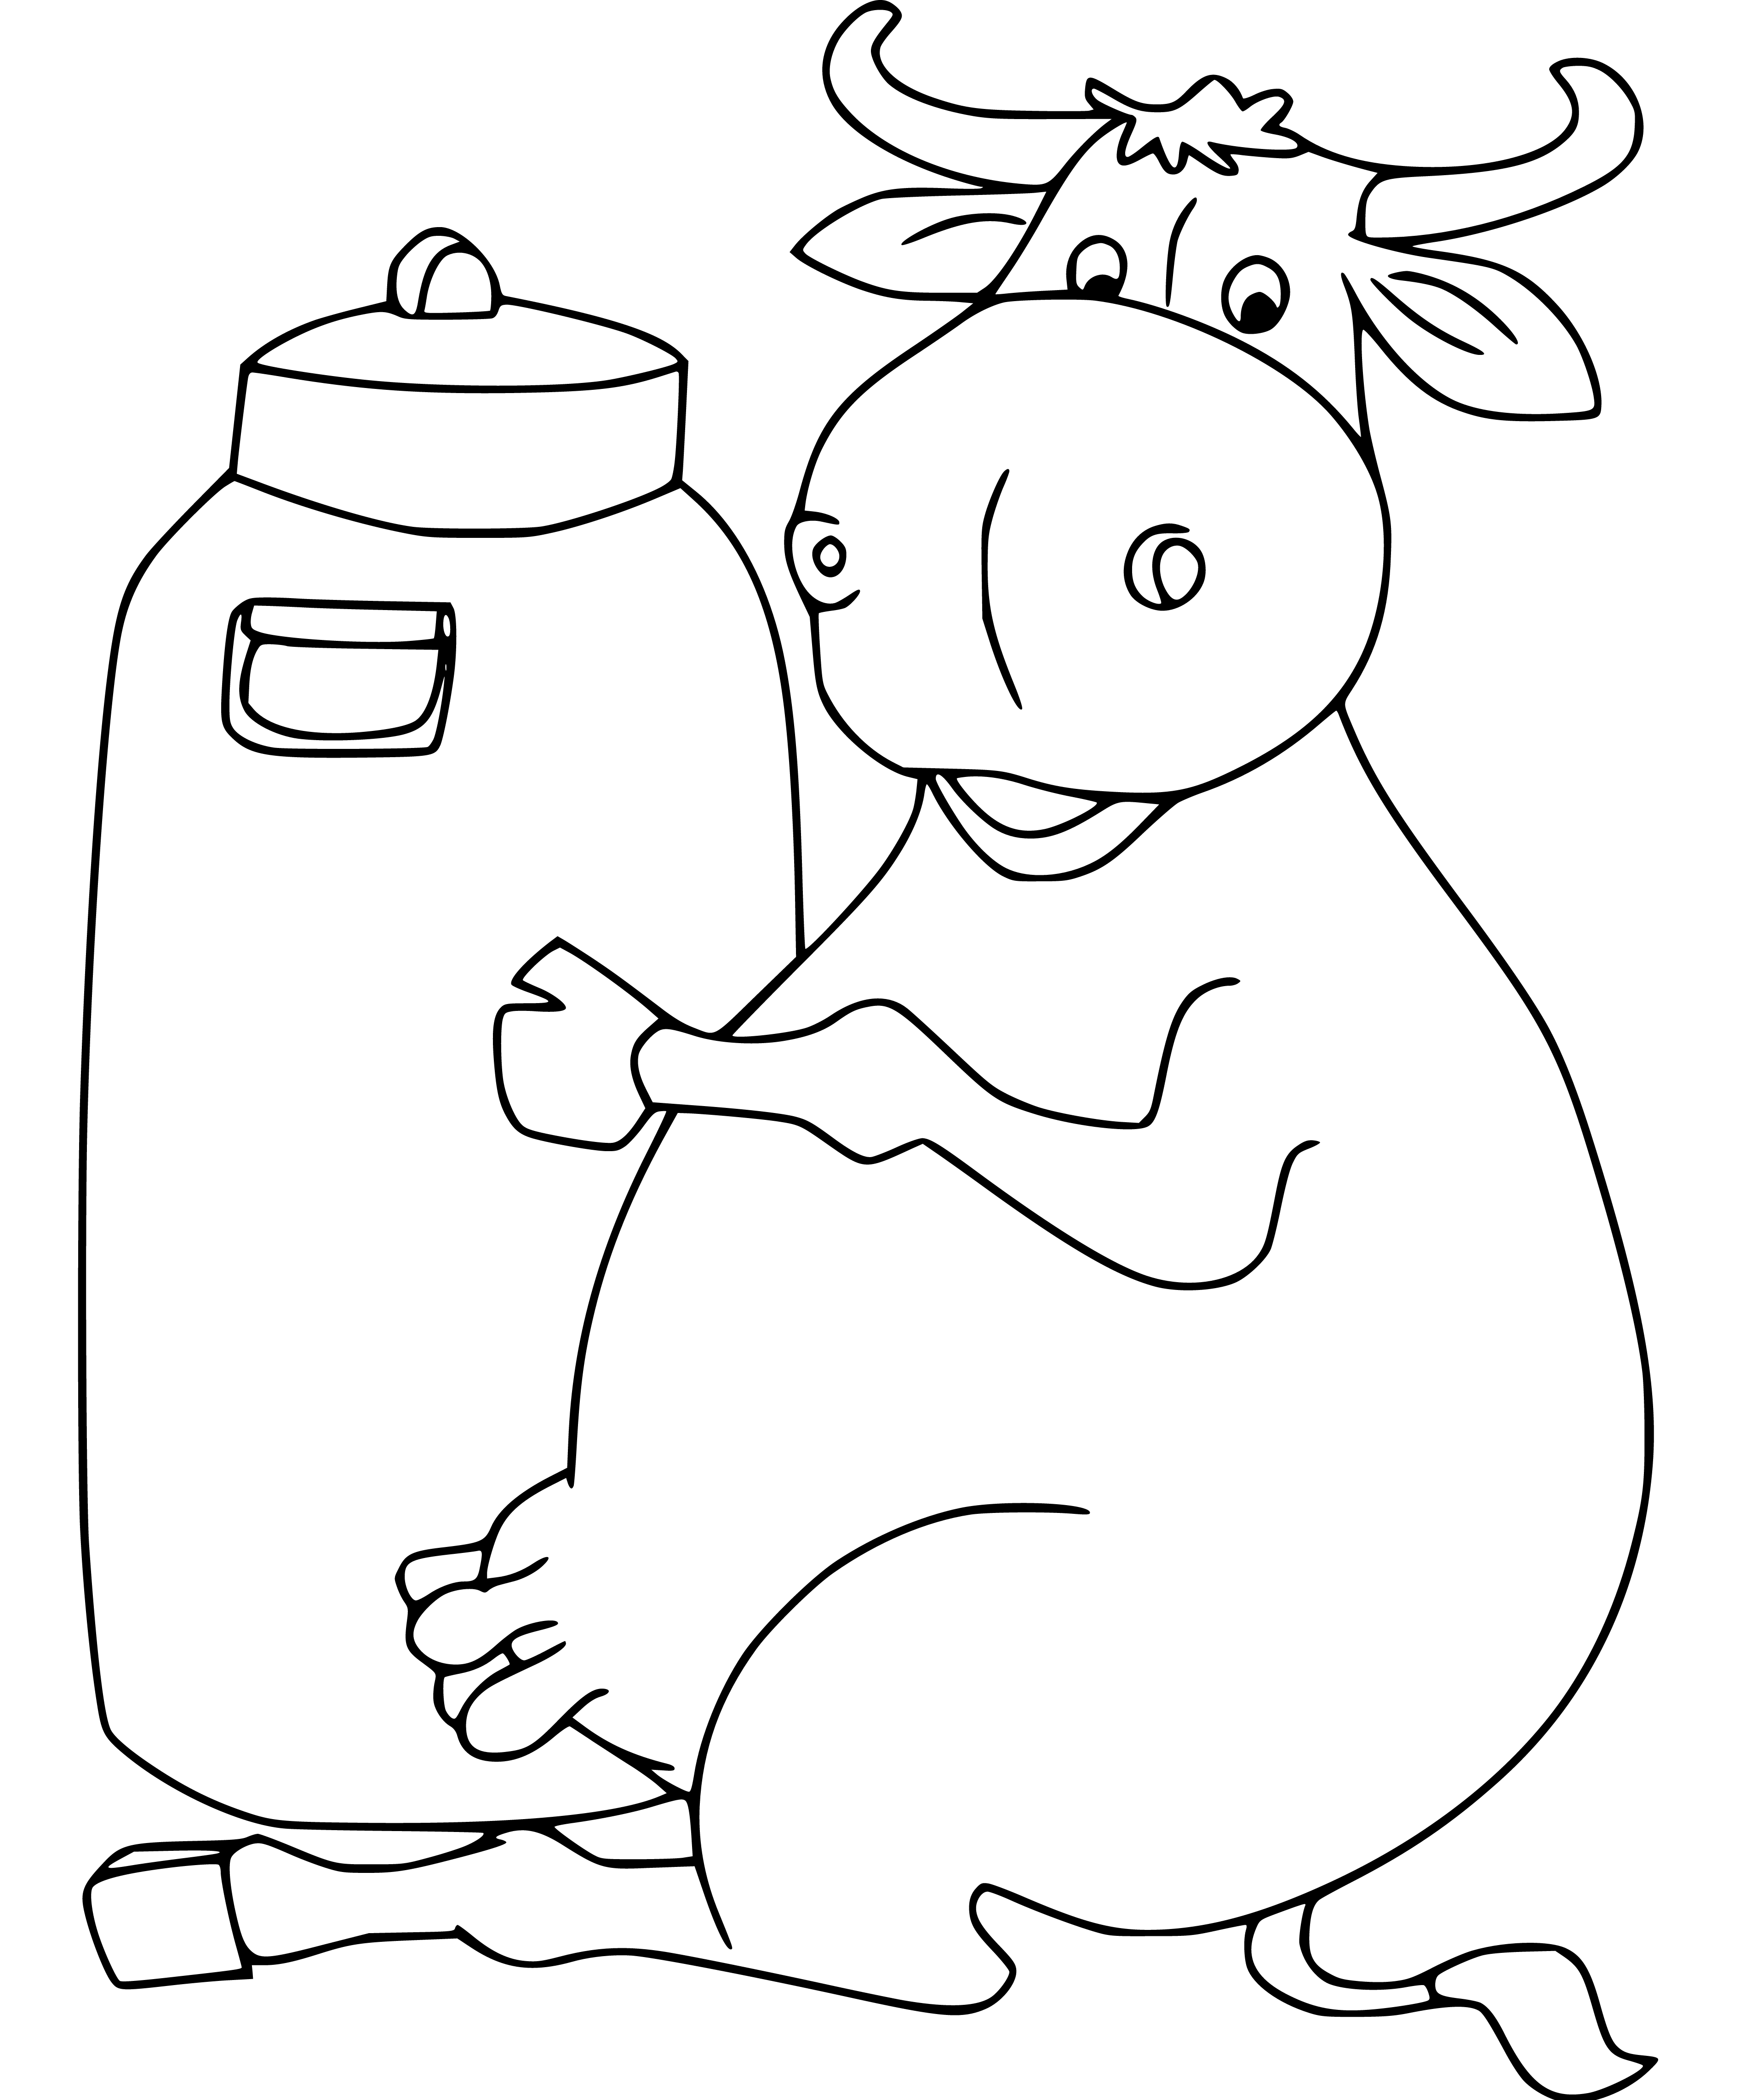 Printable Milk and Cow Coloring Page for kids.